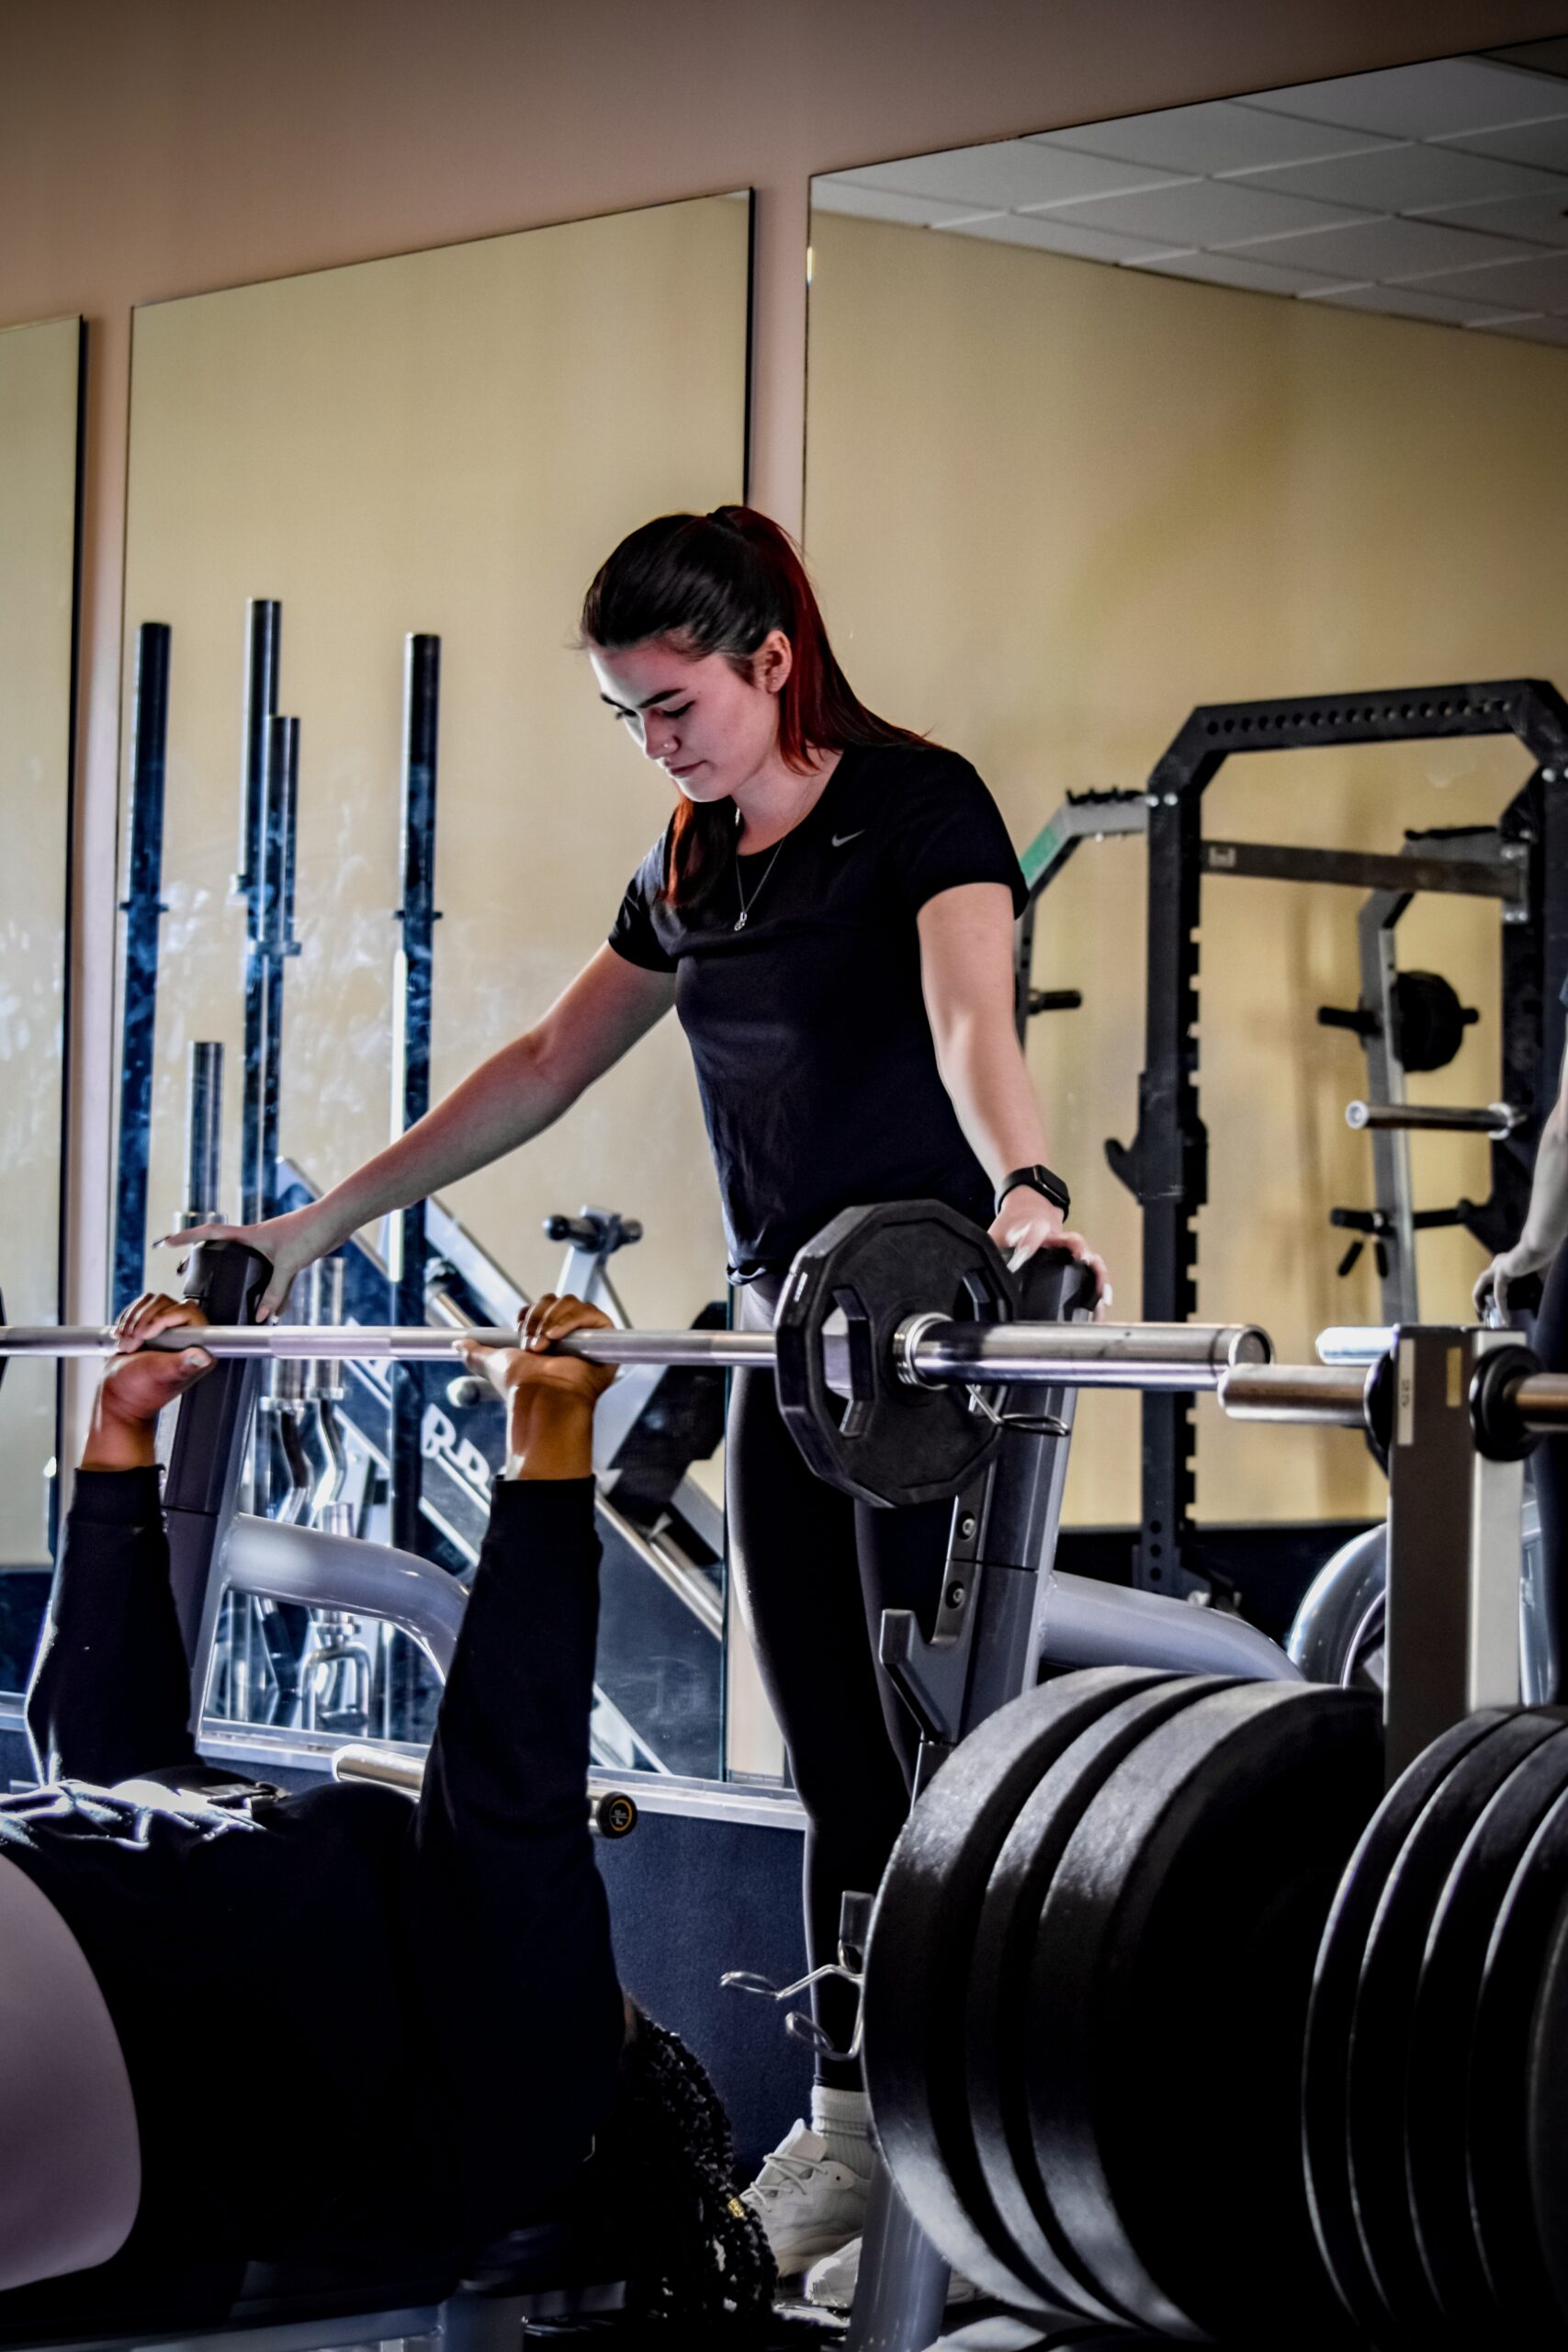 A female trainer teaching weight lifting techniques to the female client.